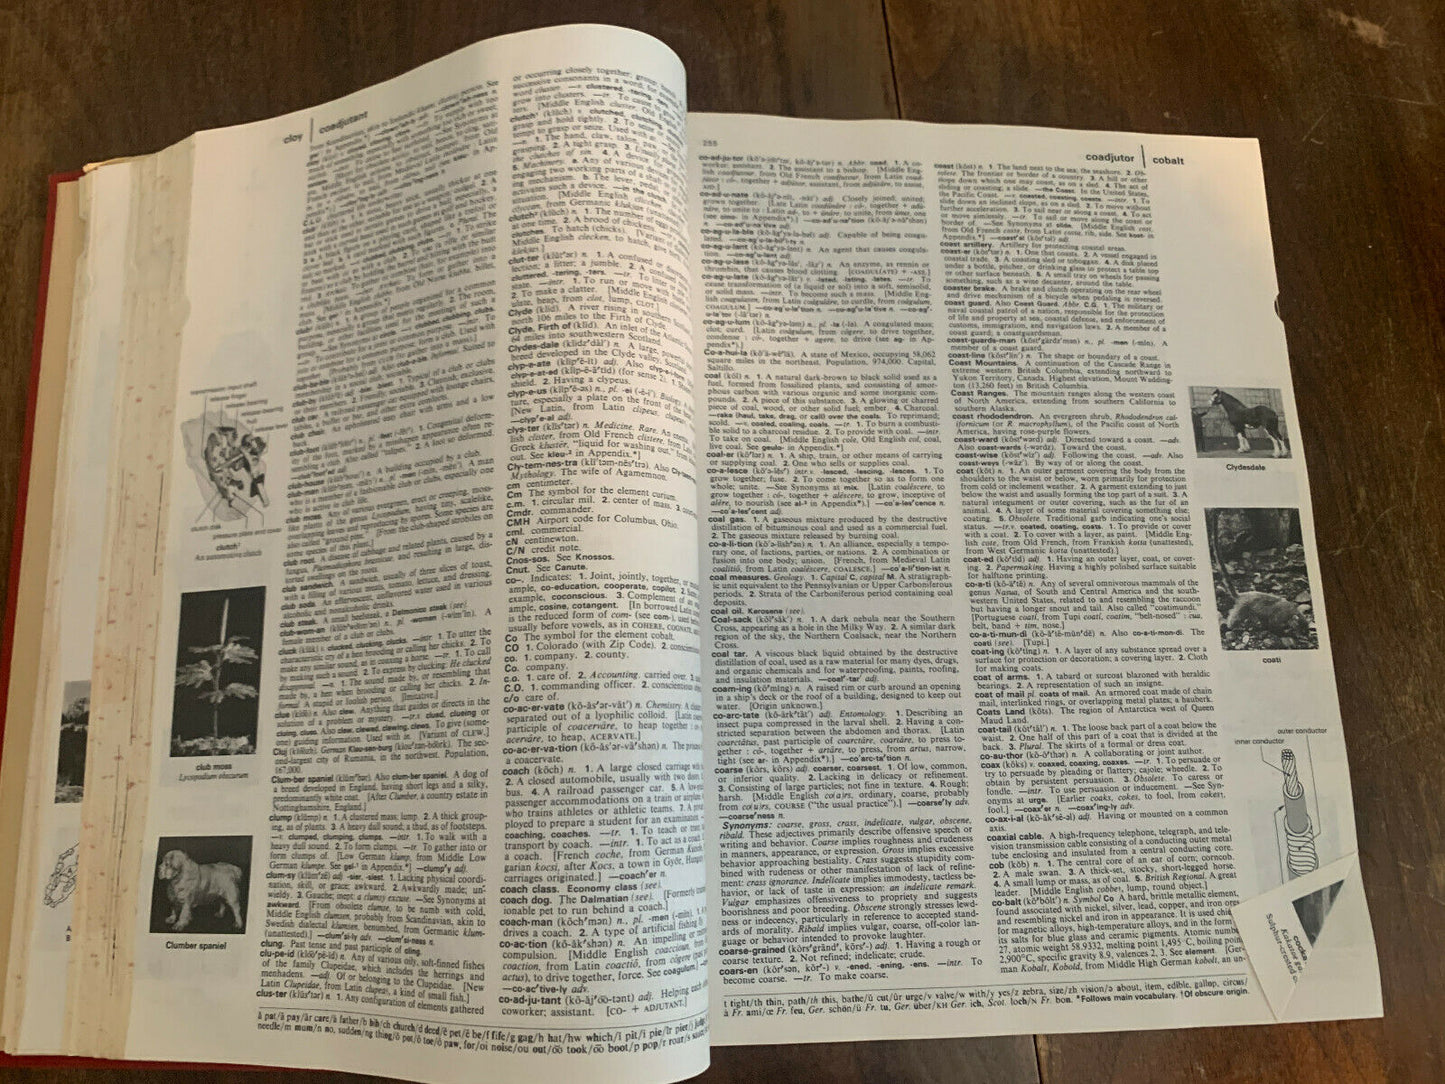 English Dictionary 1981 Vintage "The American Heritage Dictionary (Z2)